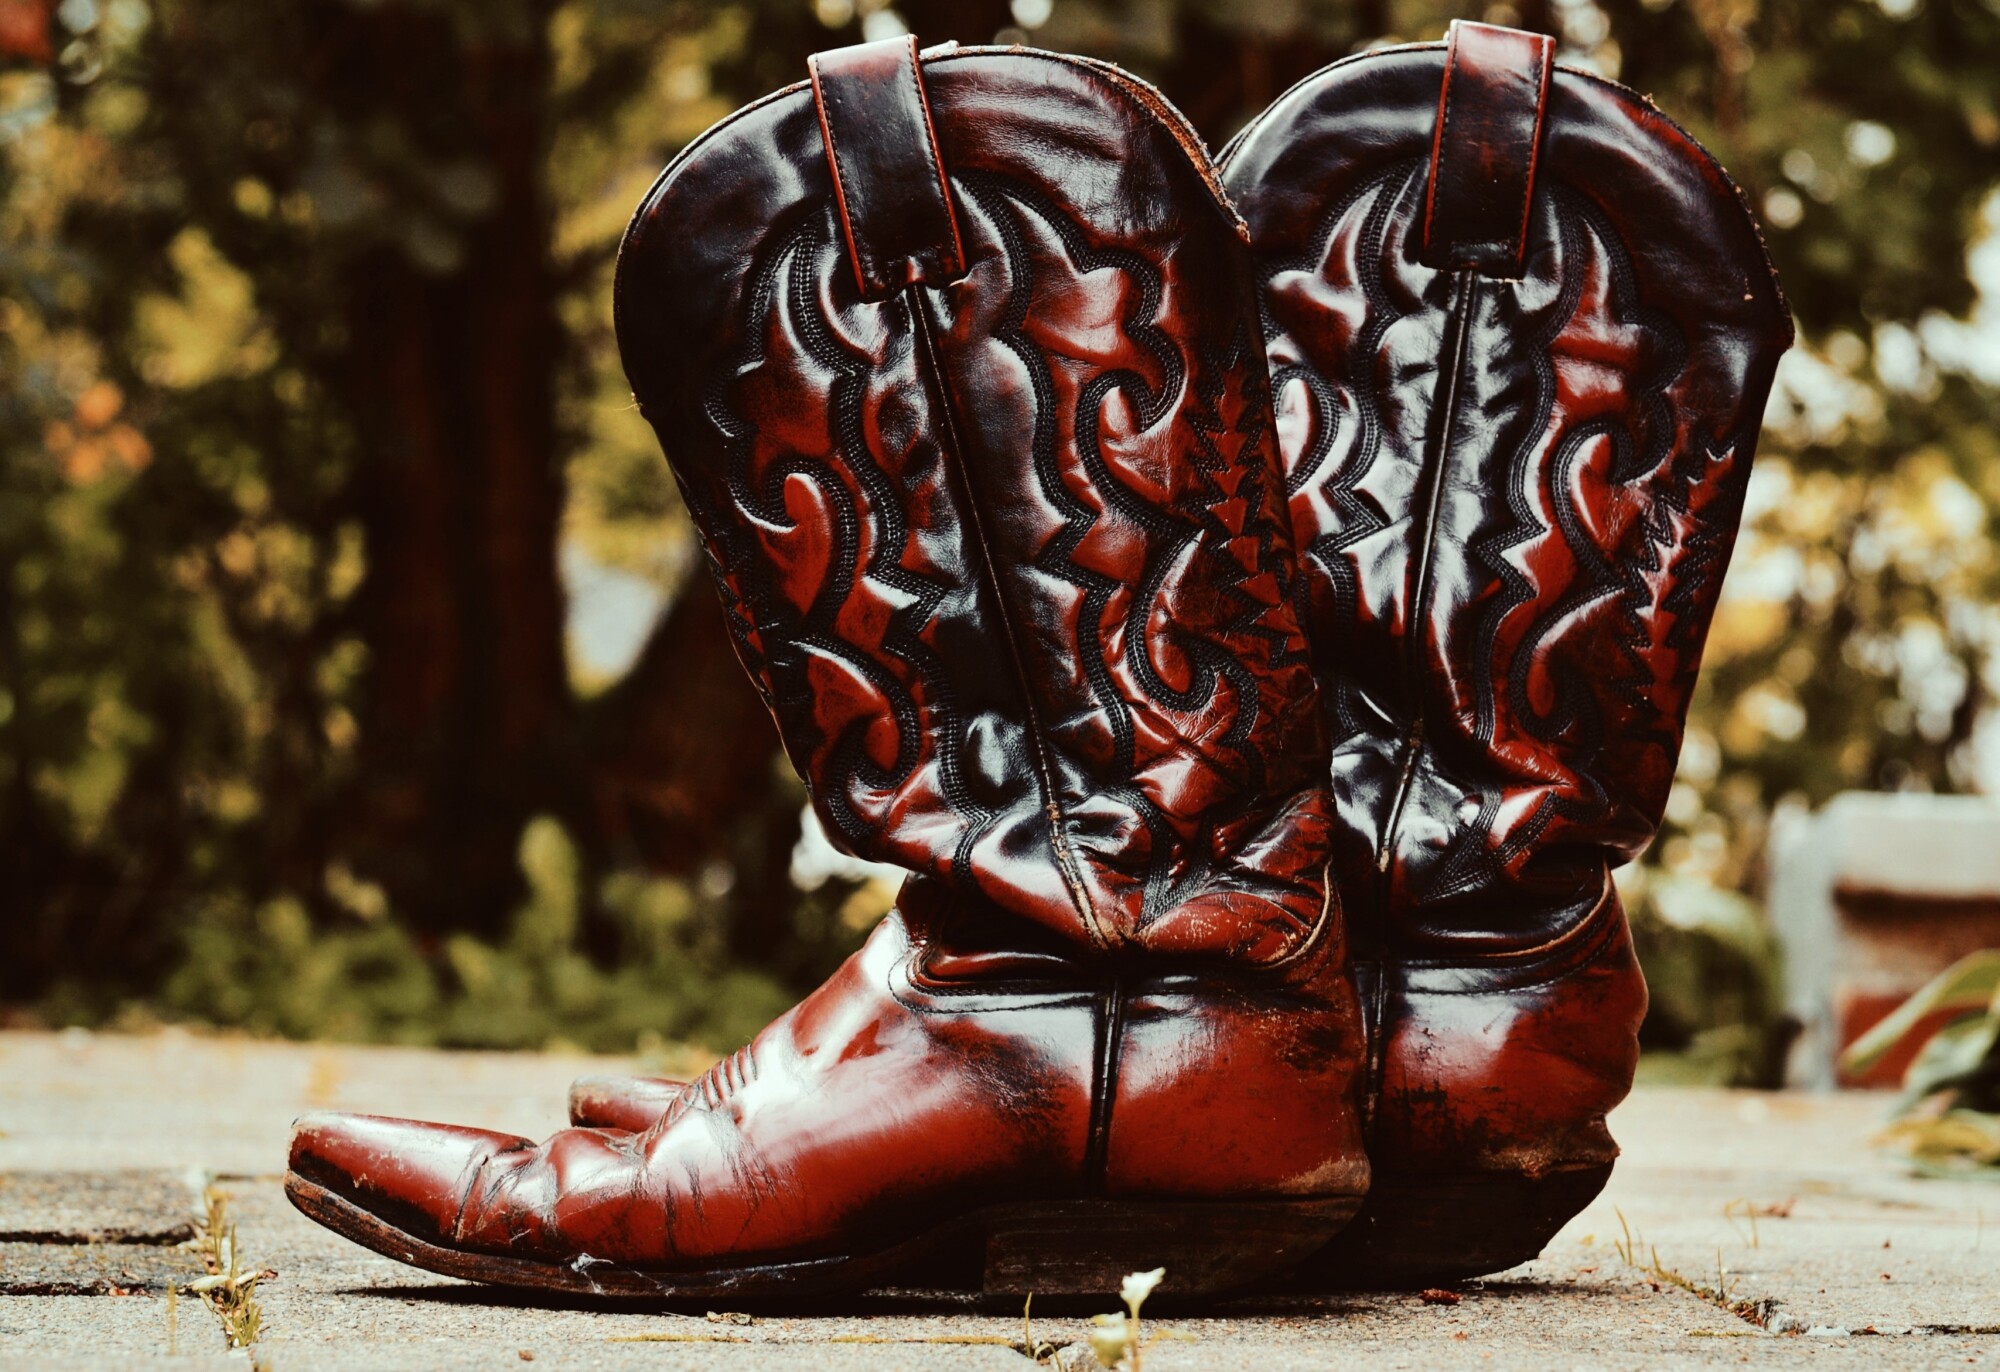 Buy > how to shine cowboy boots > in stock